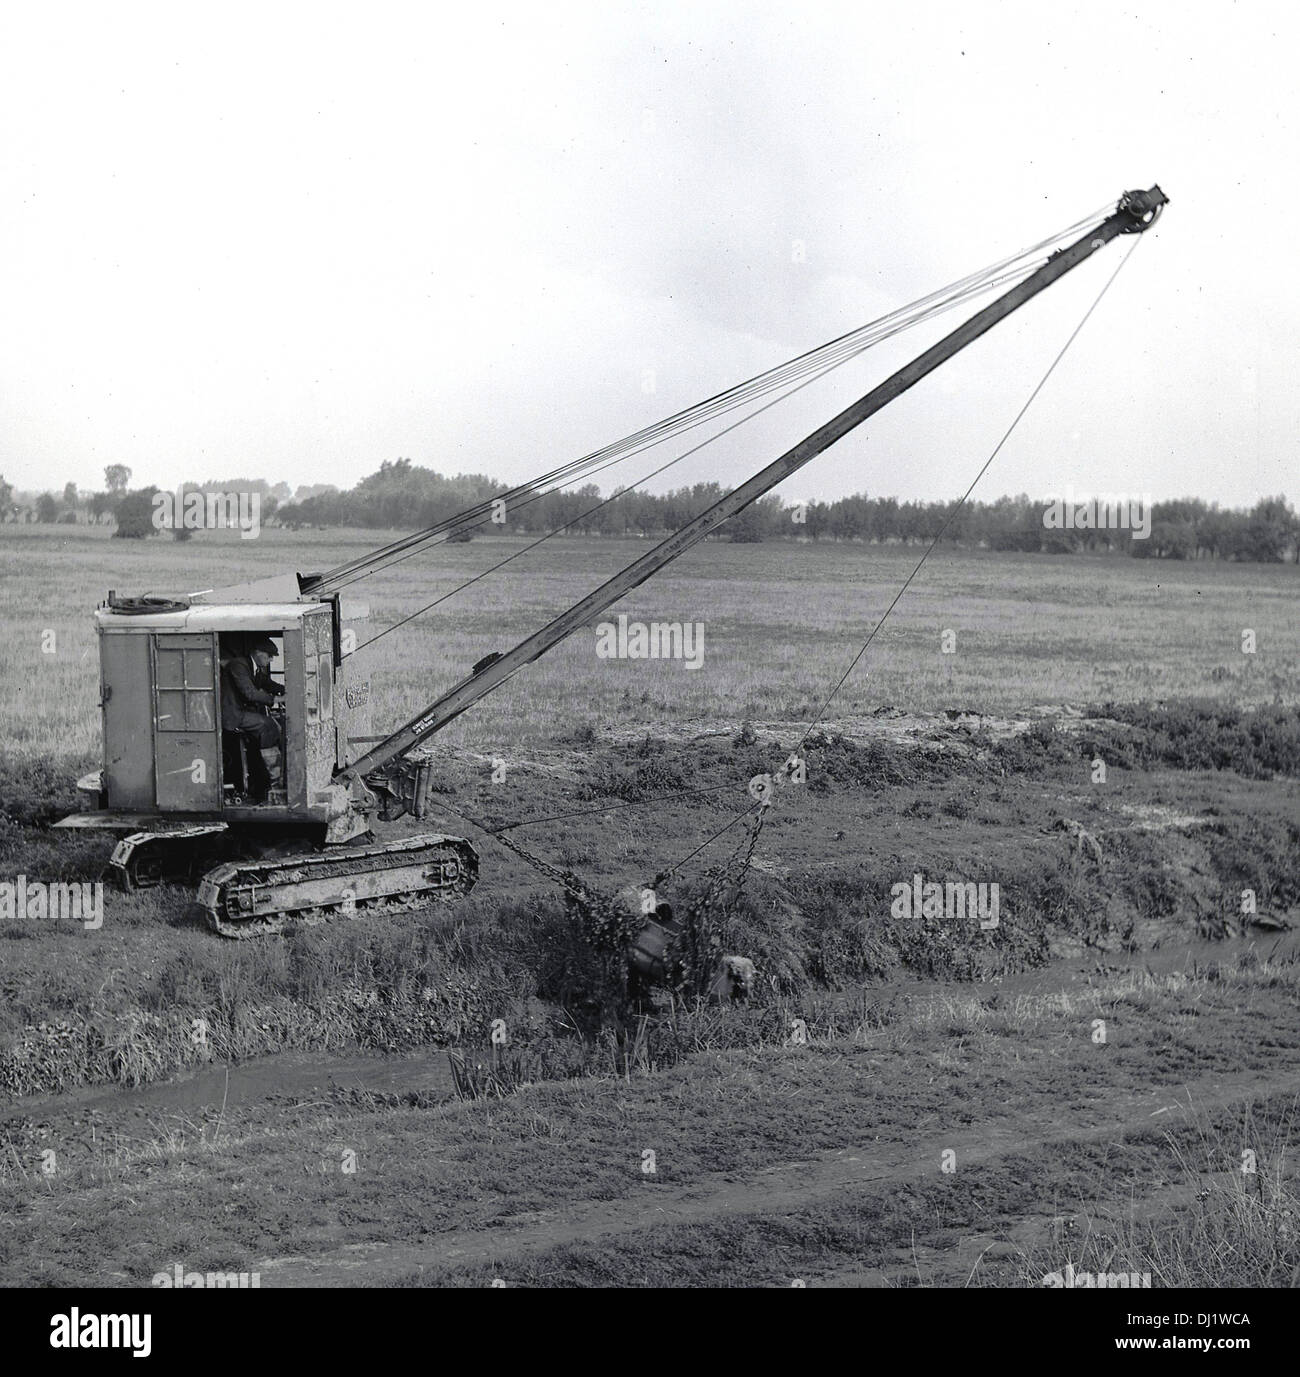 1950s, historical picture of a mechanical dragline bucket on crane with tracks positioned in a country field, excavating earth from a small river or brook that runs beside it, England, UK. Stock Photo